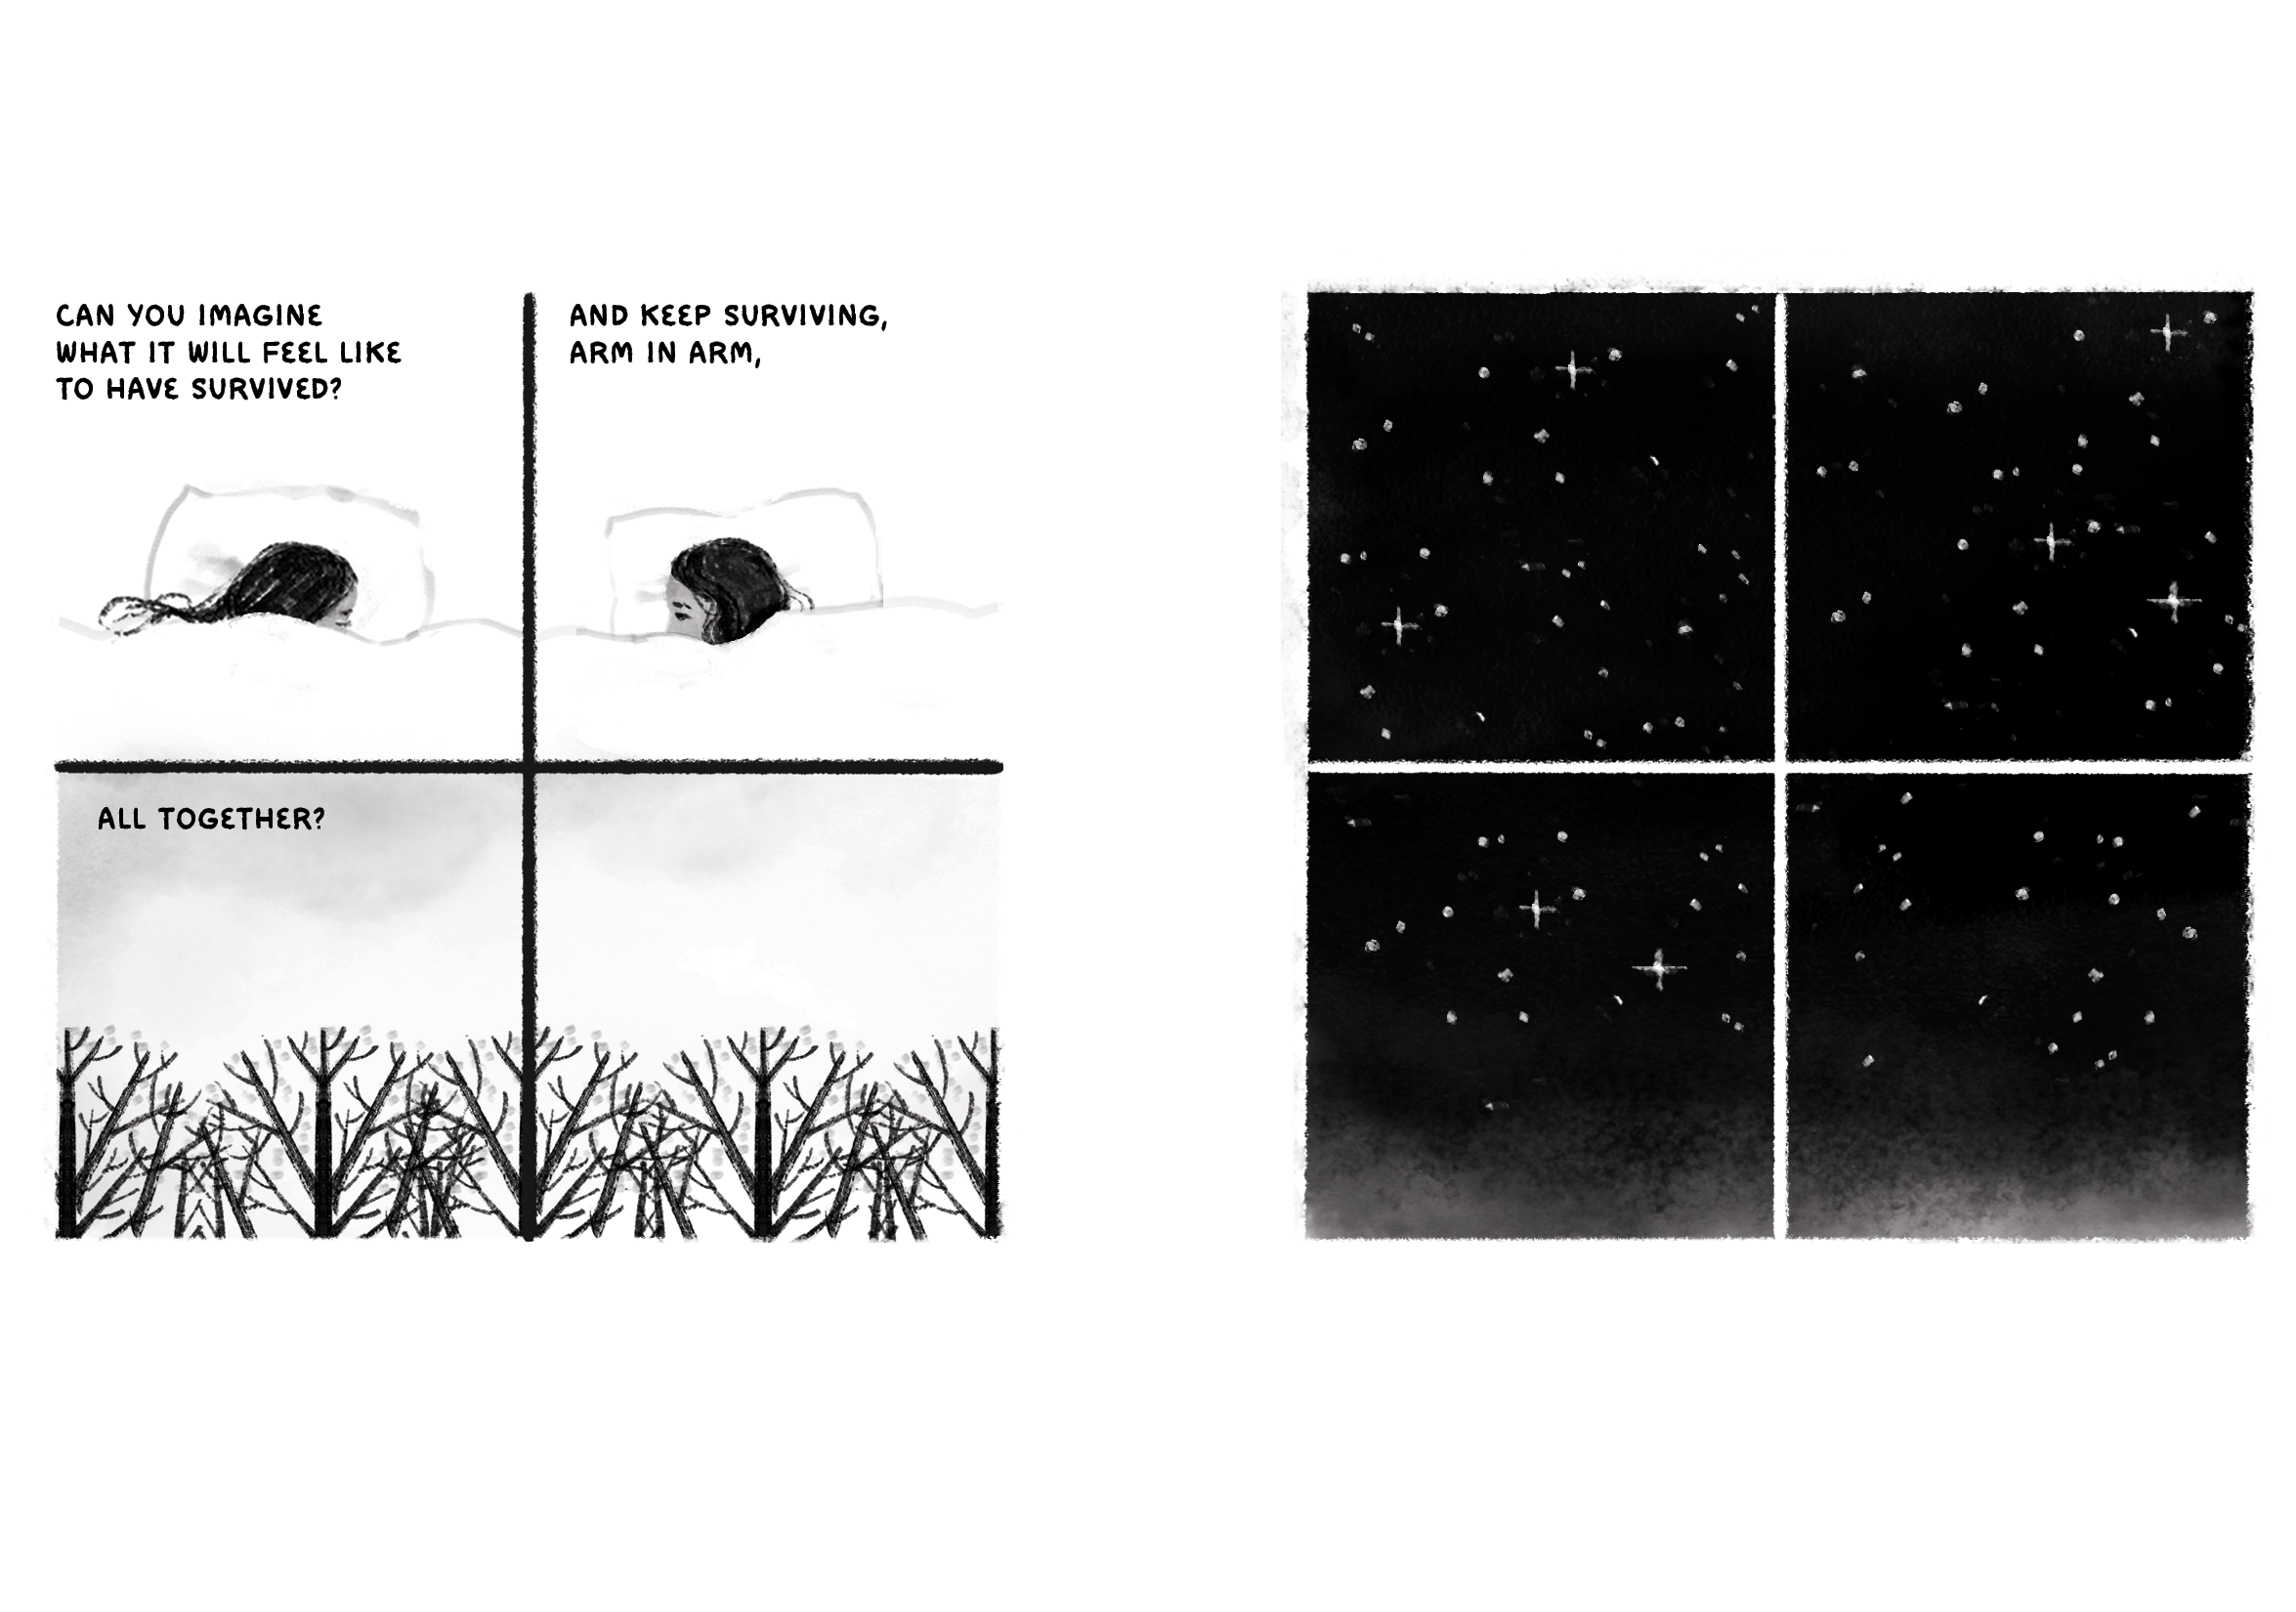 Two four-panel comics. First comic text: Can you imagine what it will feel like to have survived? And keep surviving, arm in arm, all together? First comic images: Two dark-haired figures are asleep in bed, tucked under covers, facing each other. A forest with overlapping trees in winter. Second comic has no text. Second-panel image: A night sky with many stars.